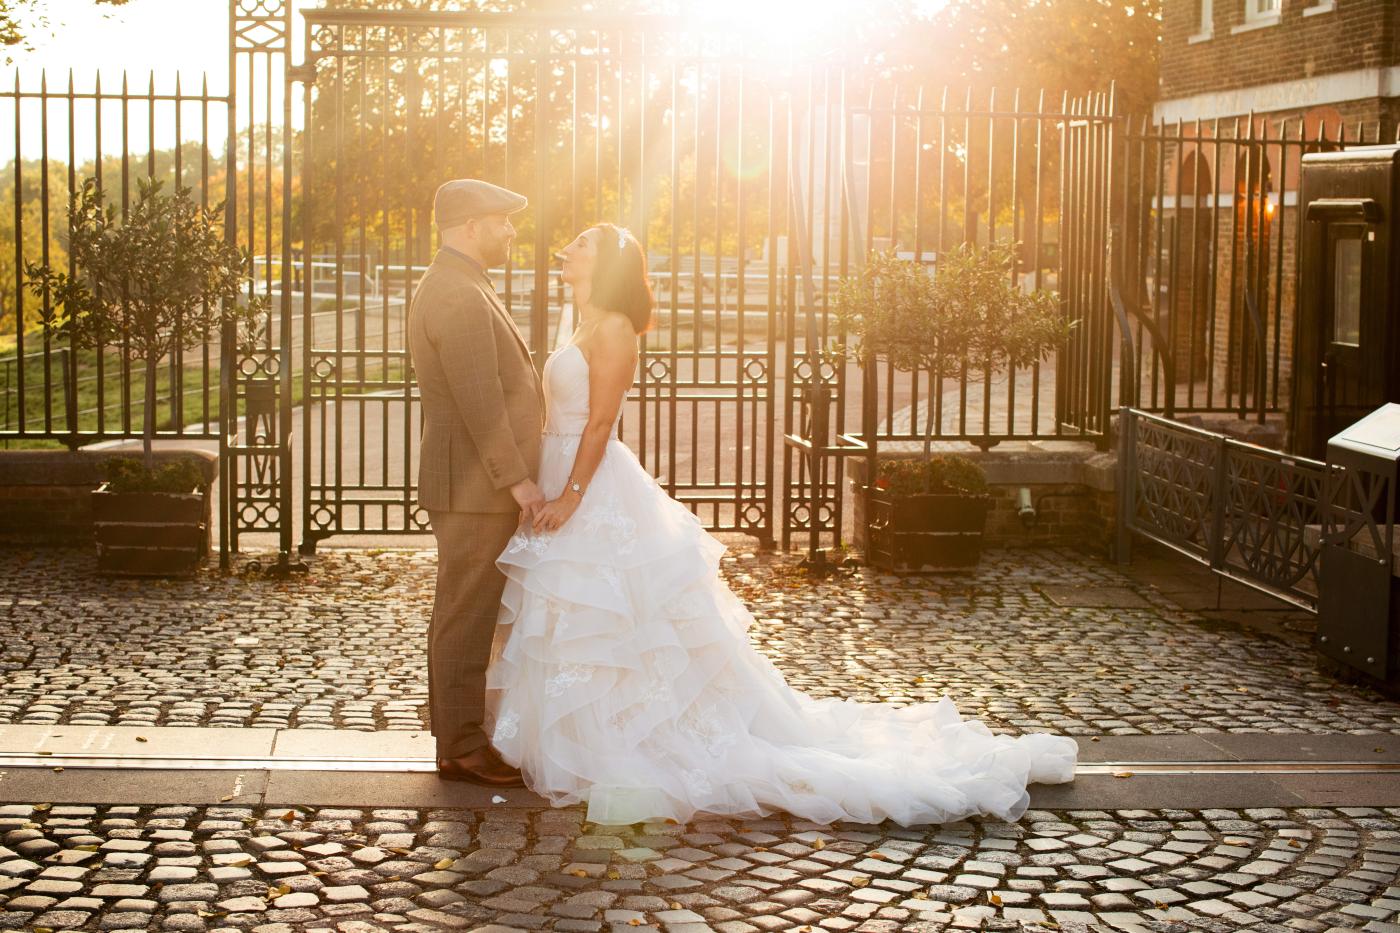 An image showing 'Sunrise wedding of Phil and Sarah'